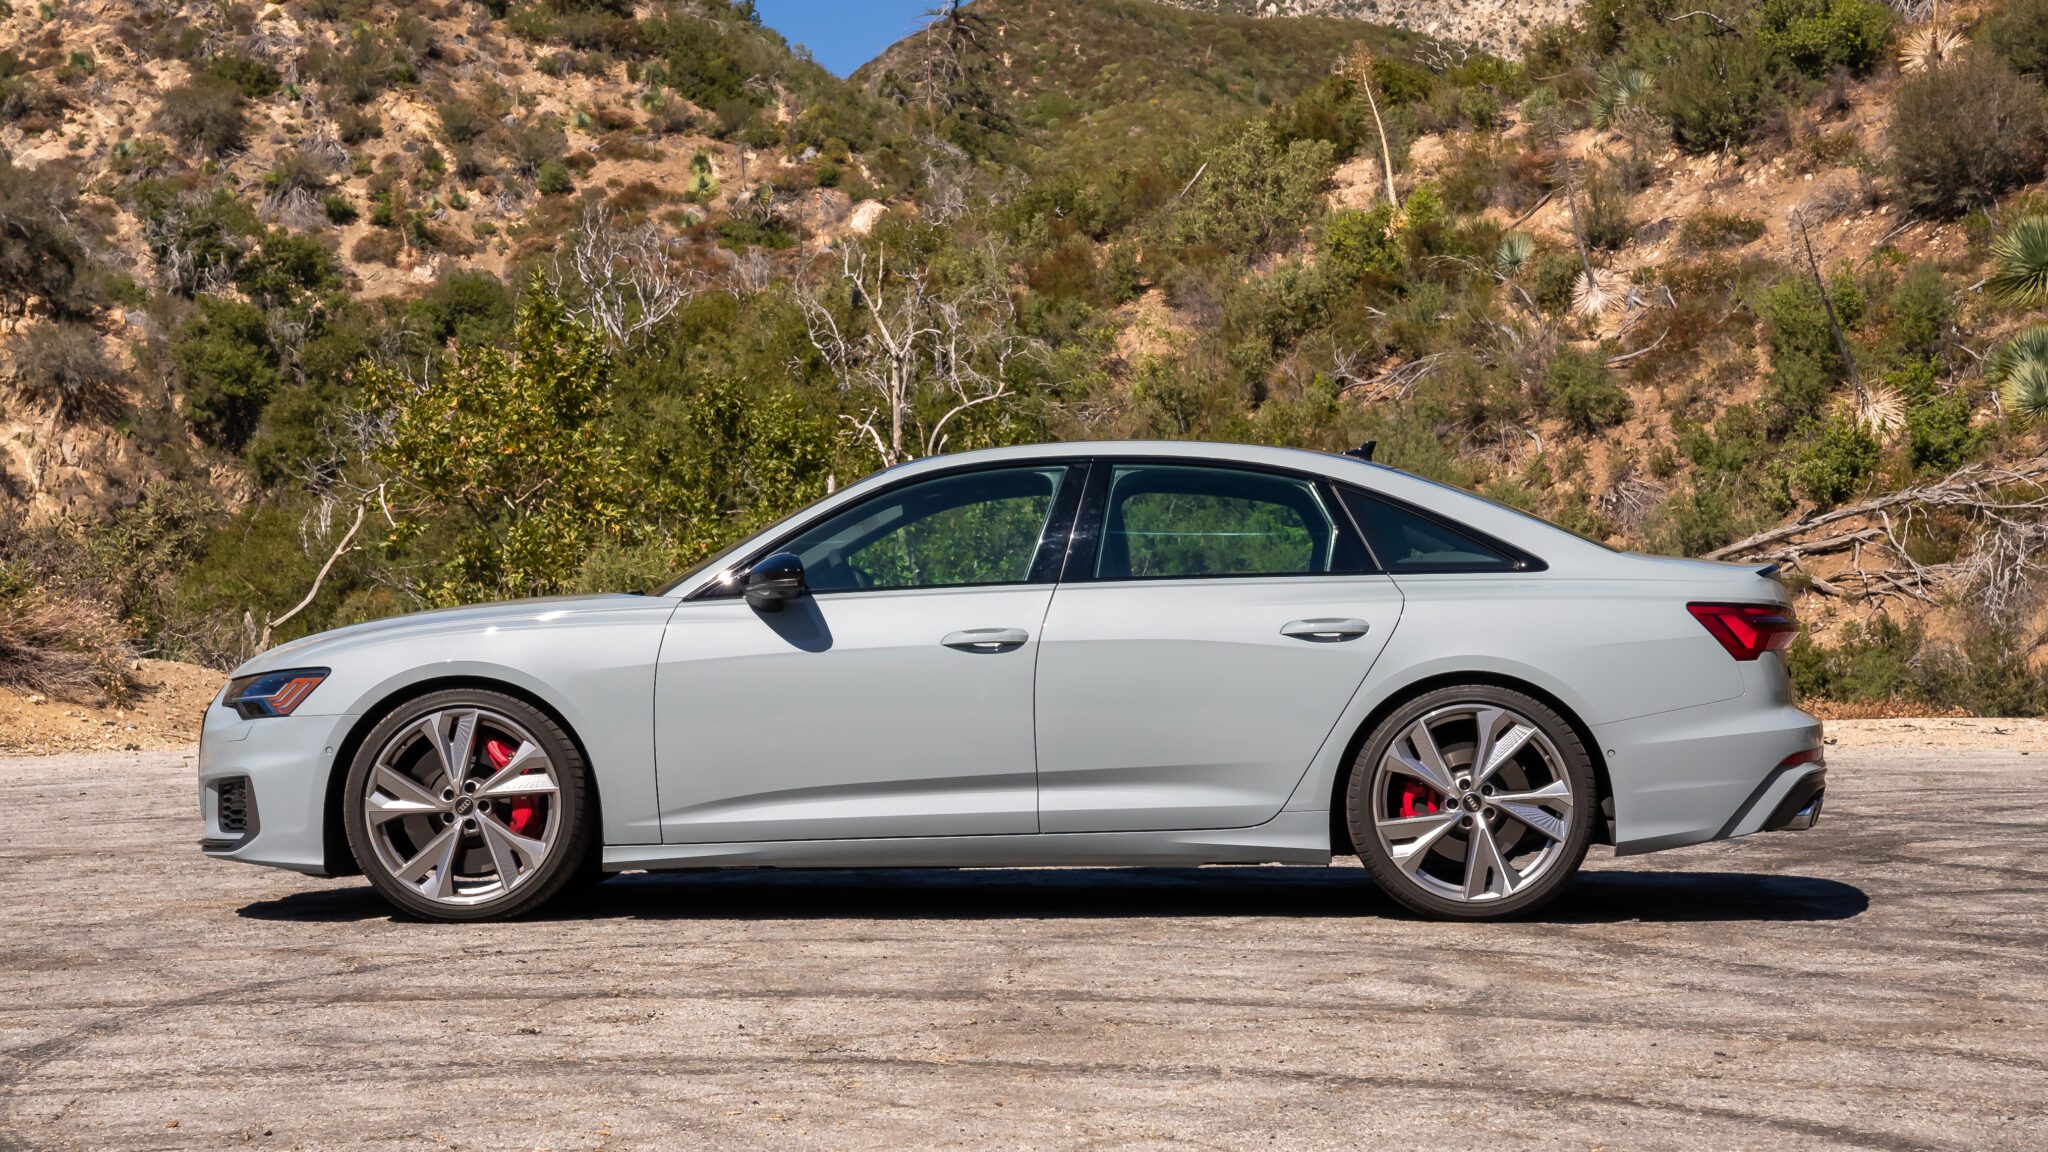 An image of an Audi S6 parked outdoors.